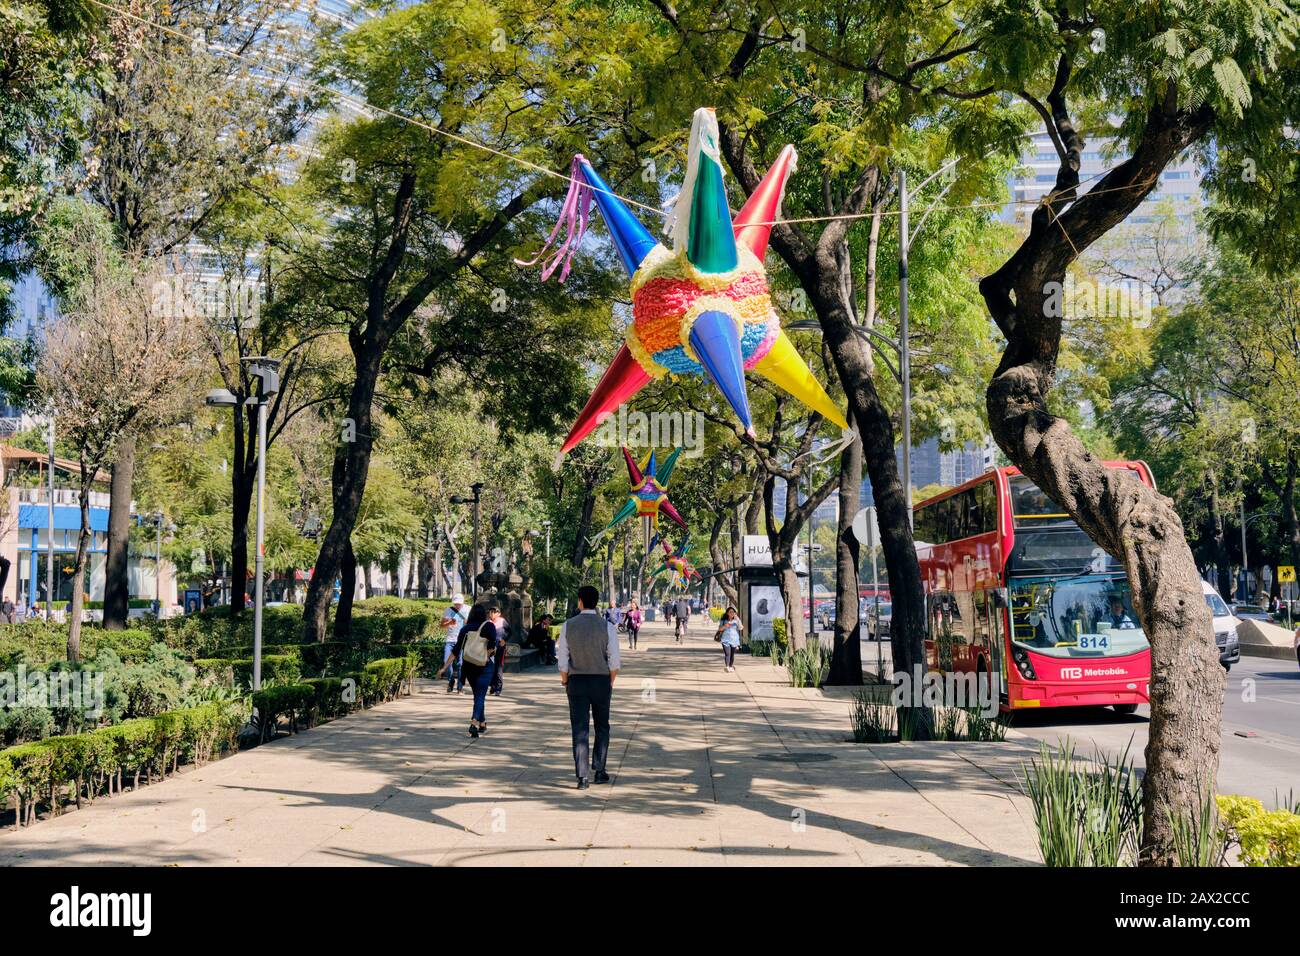 Tree lined sidewalk with pedestrians and hanging star pinata on Avenida de la Reforma in Mexico City Stock Photo